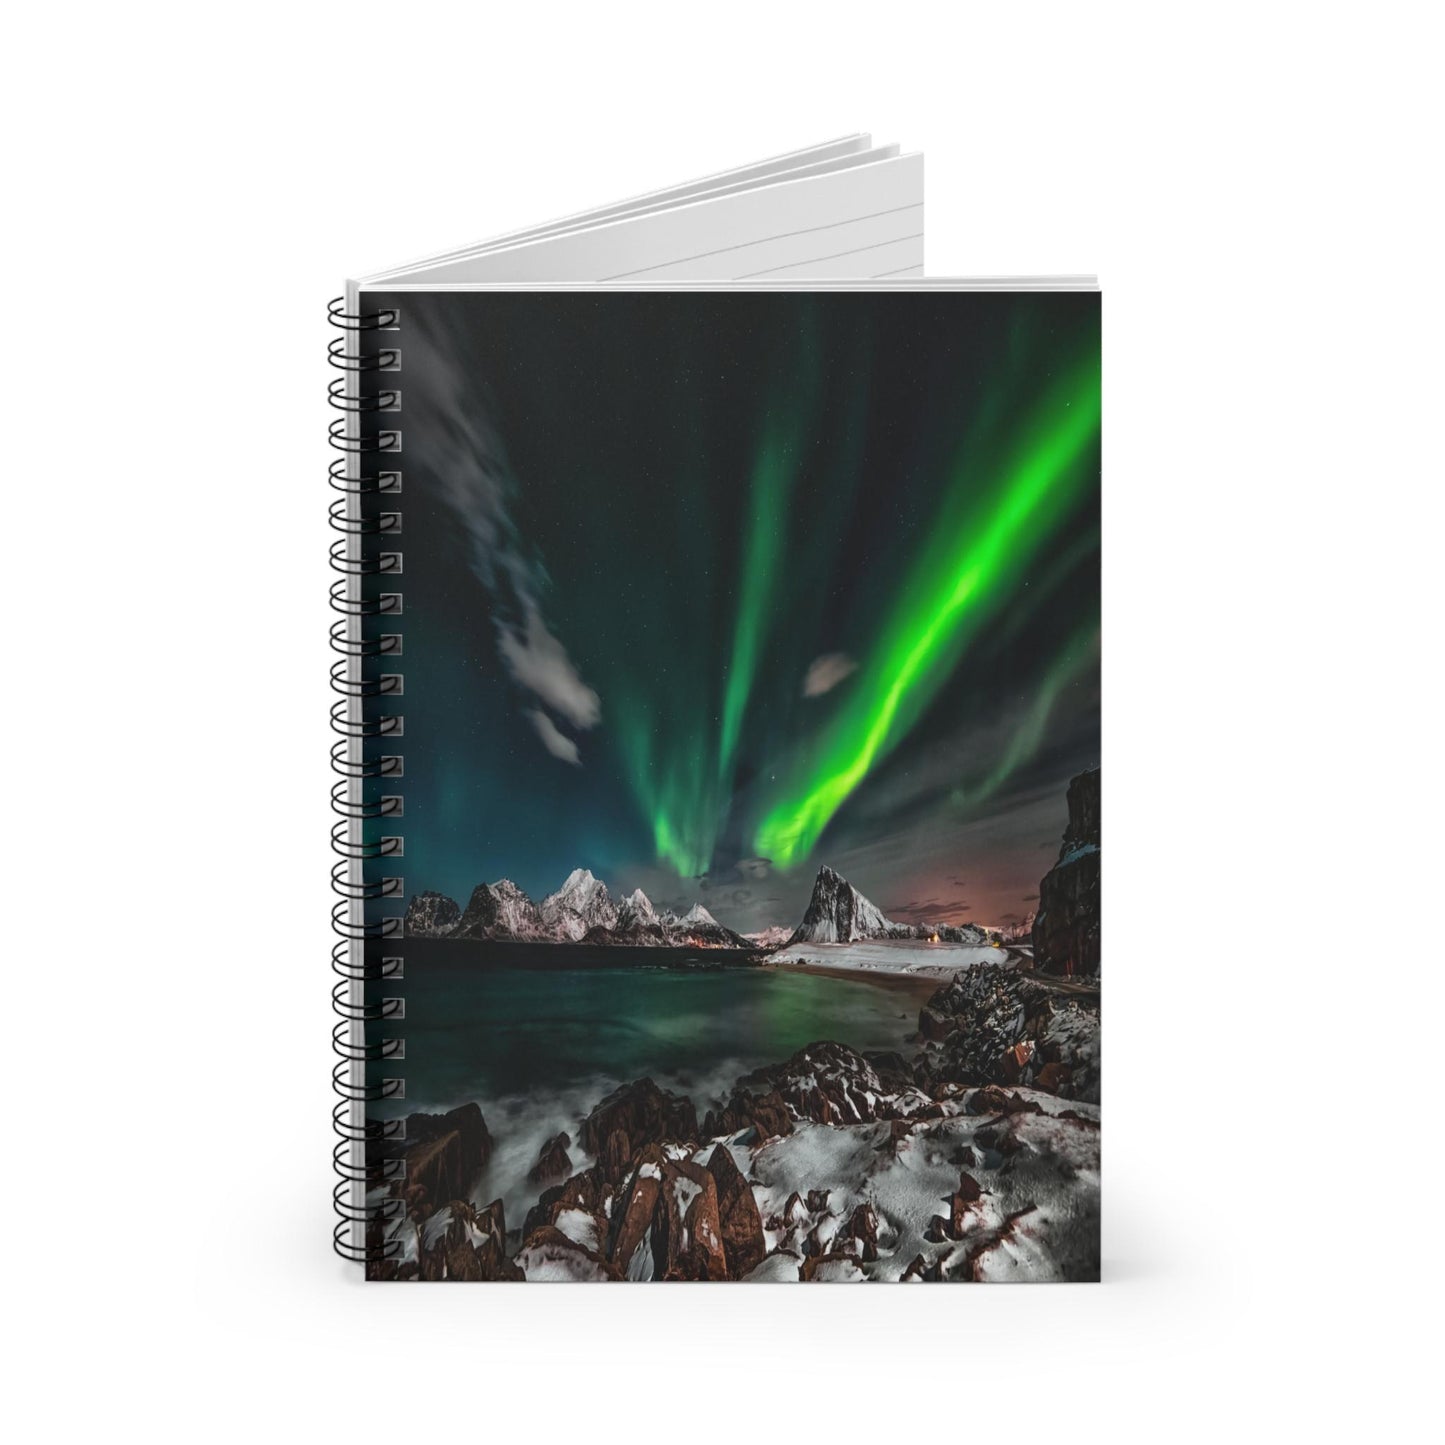 Unique Aurora Borealis Spiral Notebook Ruled Line - Personalized Northern Light View - Stationary Accessories - Perfect Aurora Lovers Gift 24